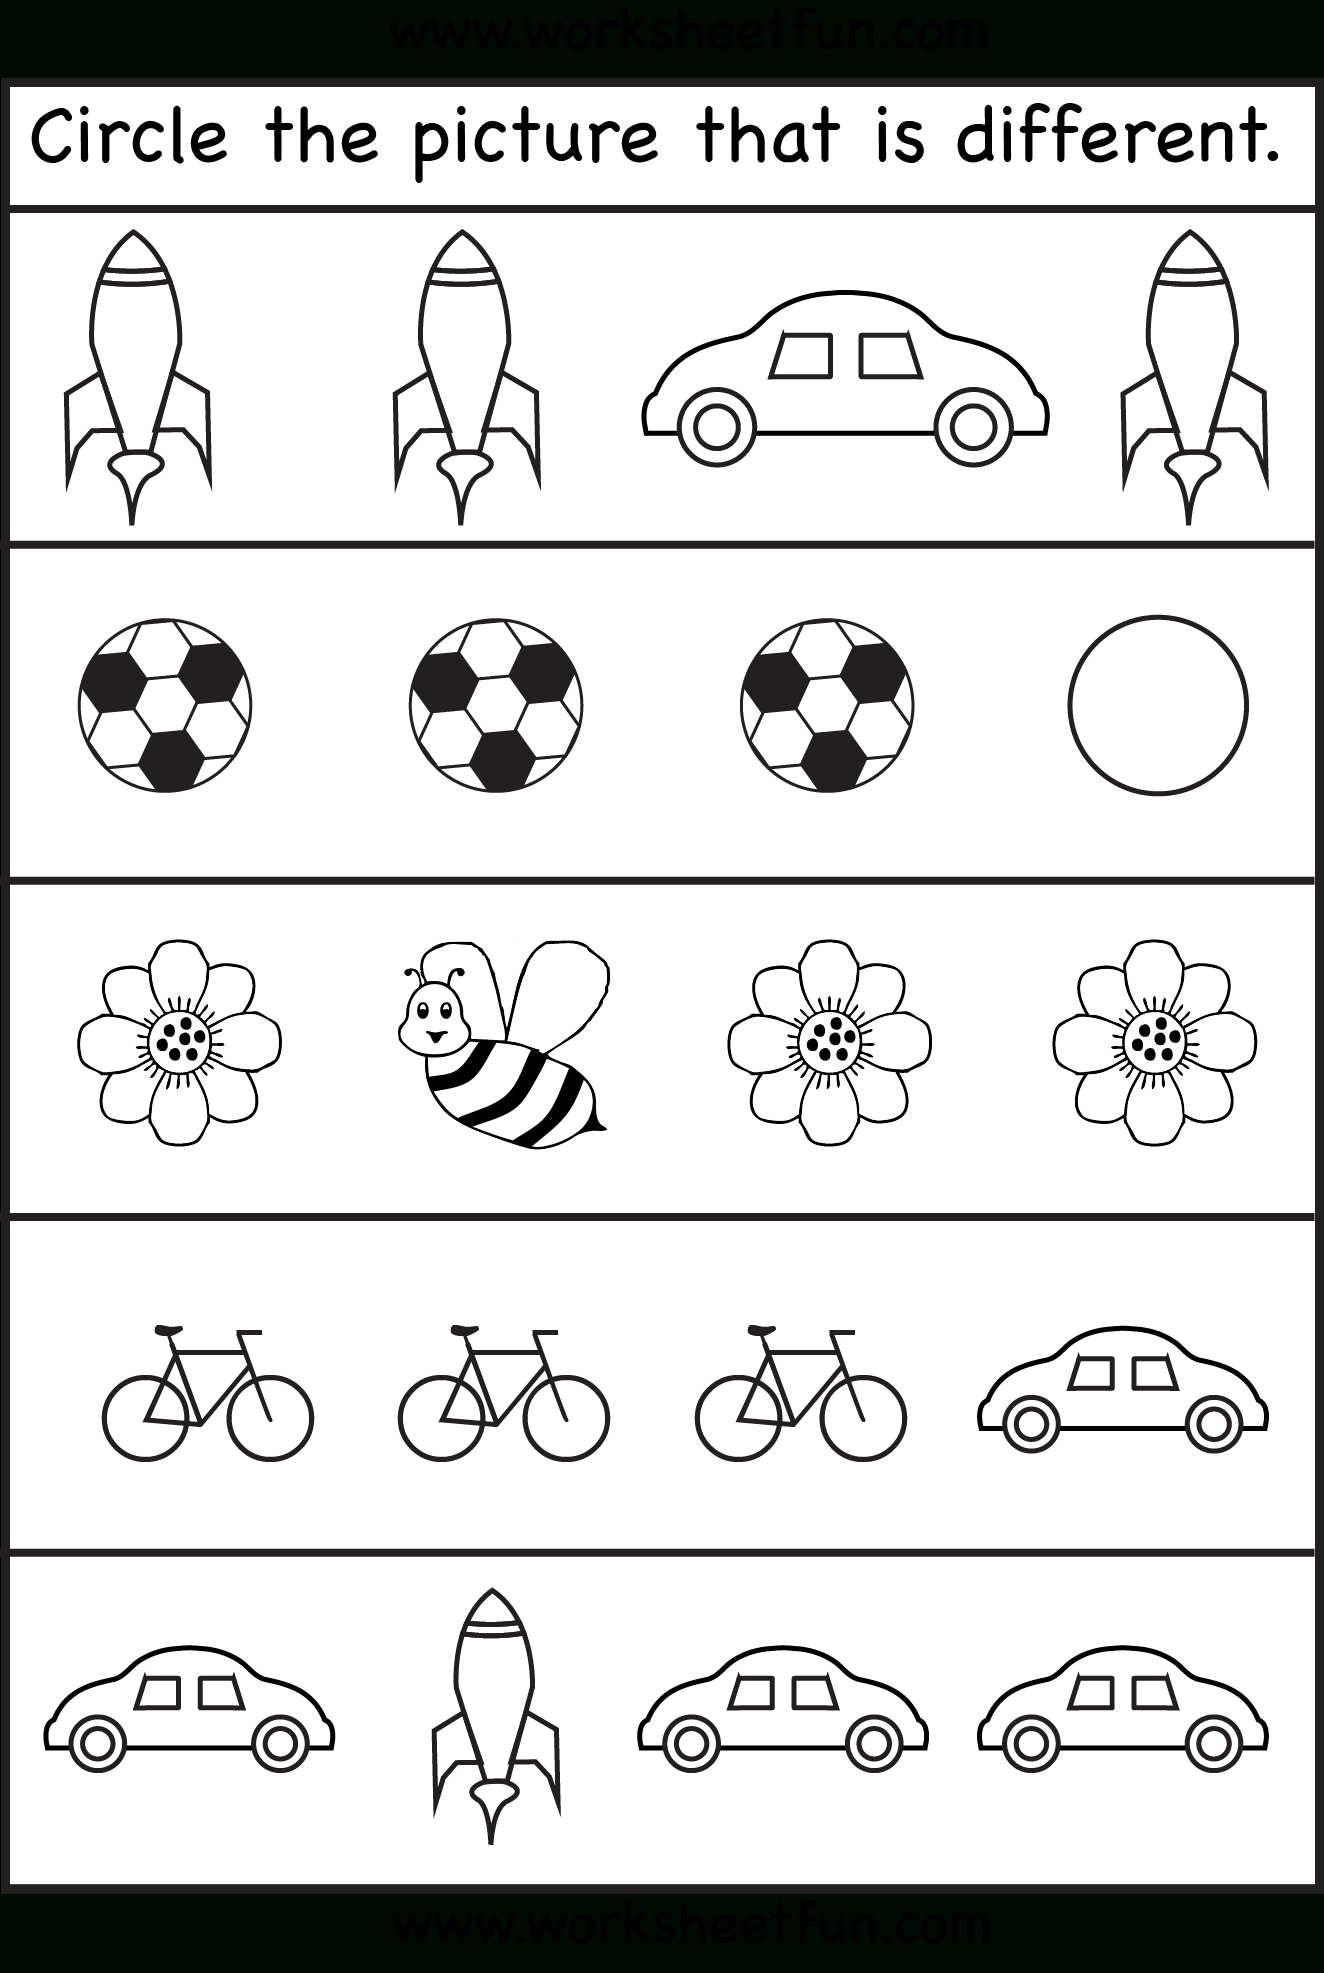 Circle The Picture That Is Different - 4 Worksheets | Preschool Work | Free Printable Toddler Learning Worksheets